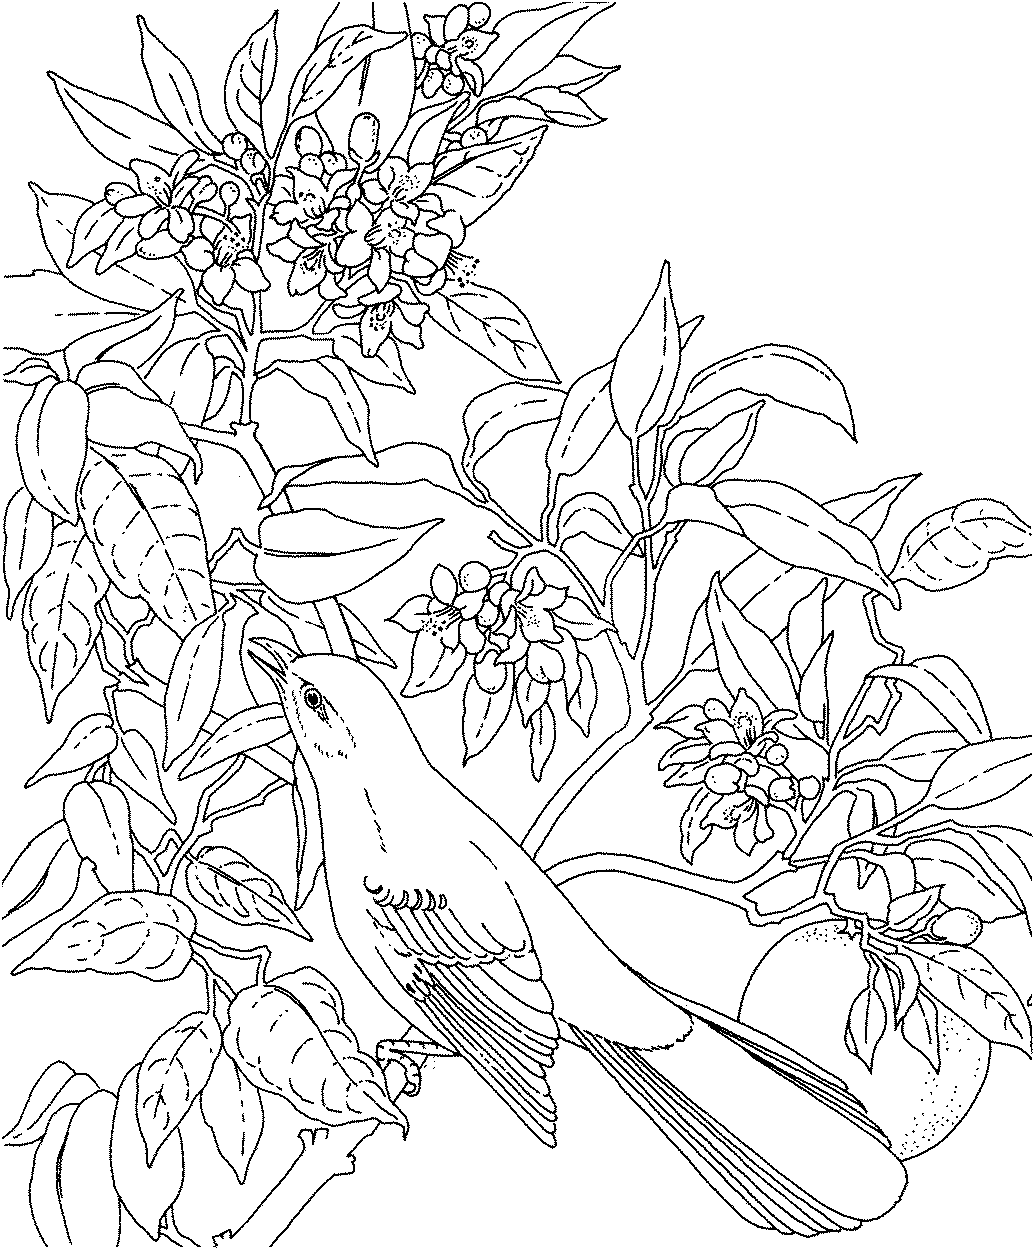 coloring books for adults flowers vase of flowers adult coloring page favecraftscom for coloring books adults flowers 